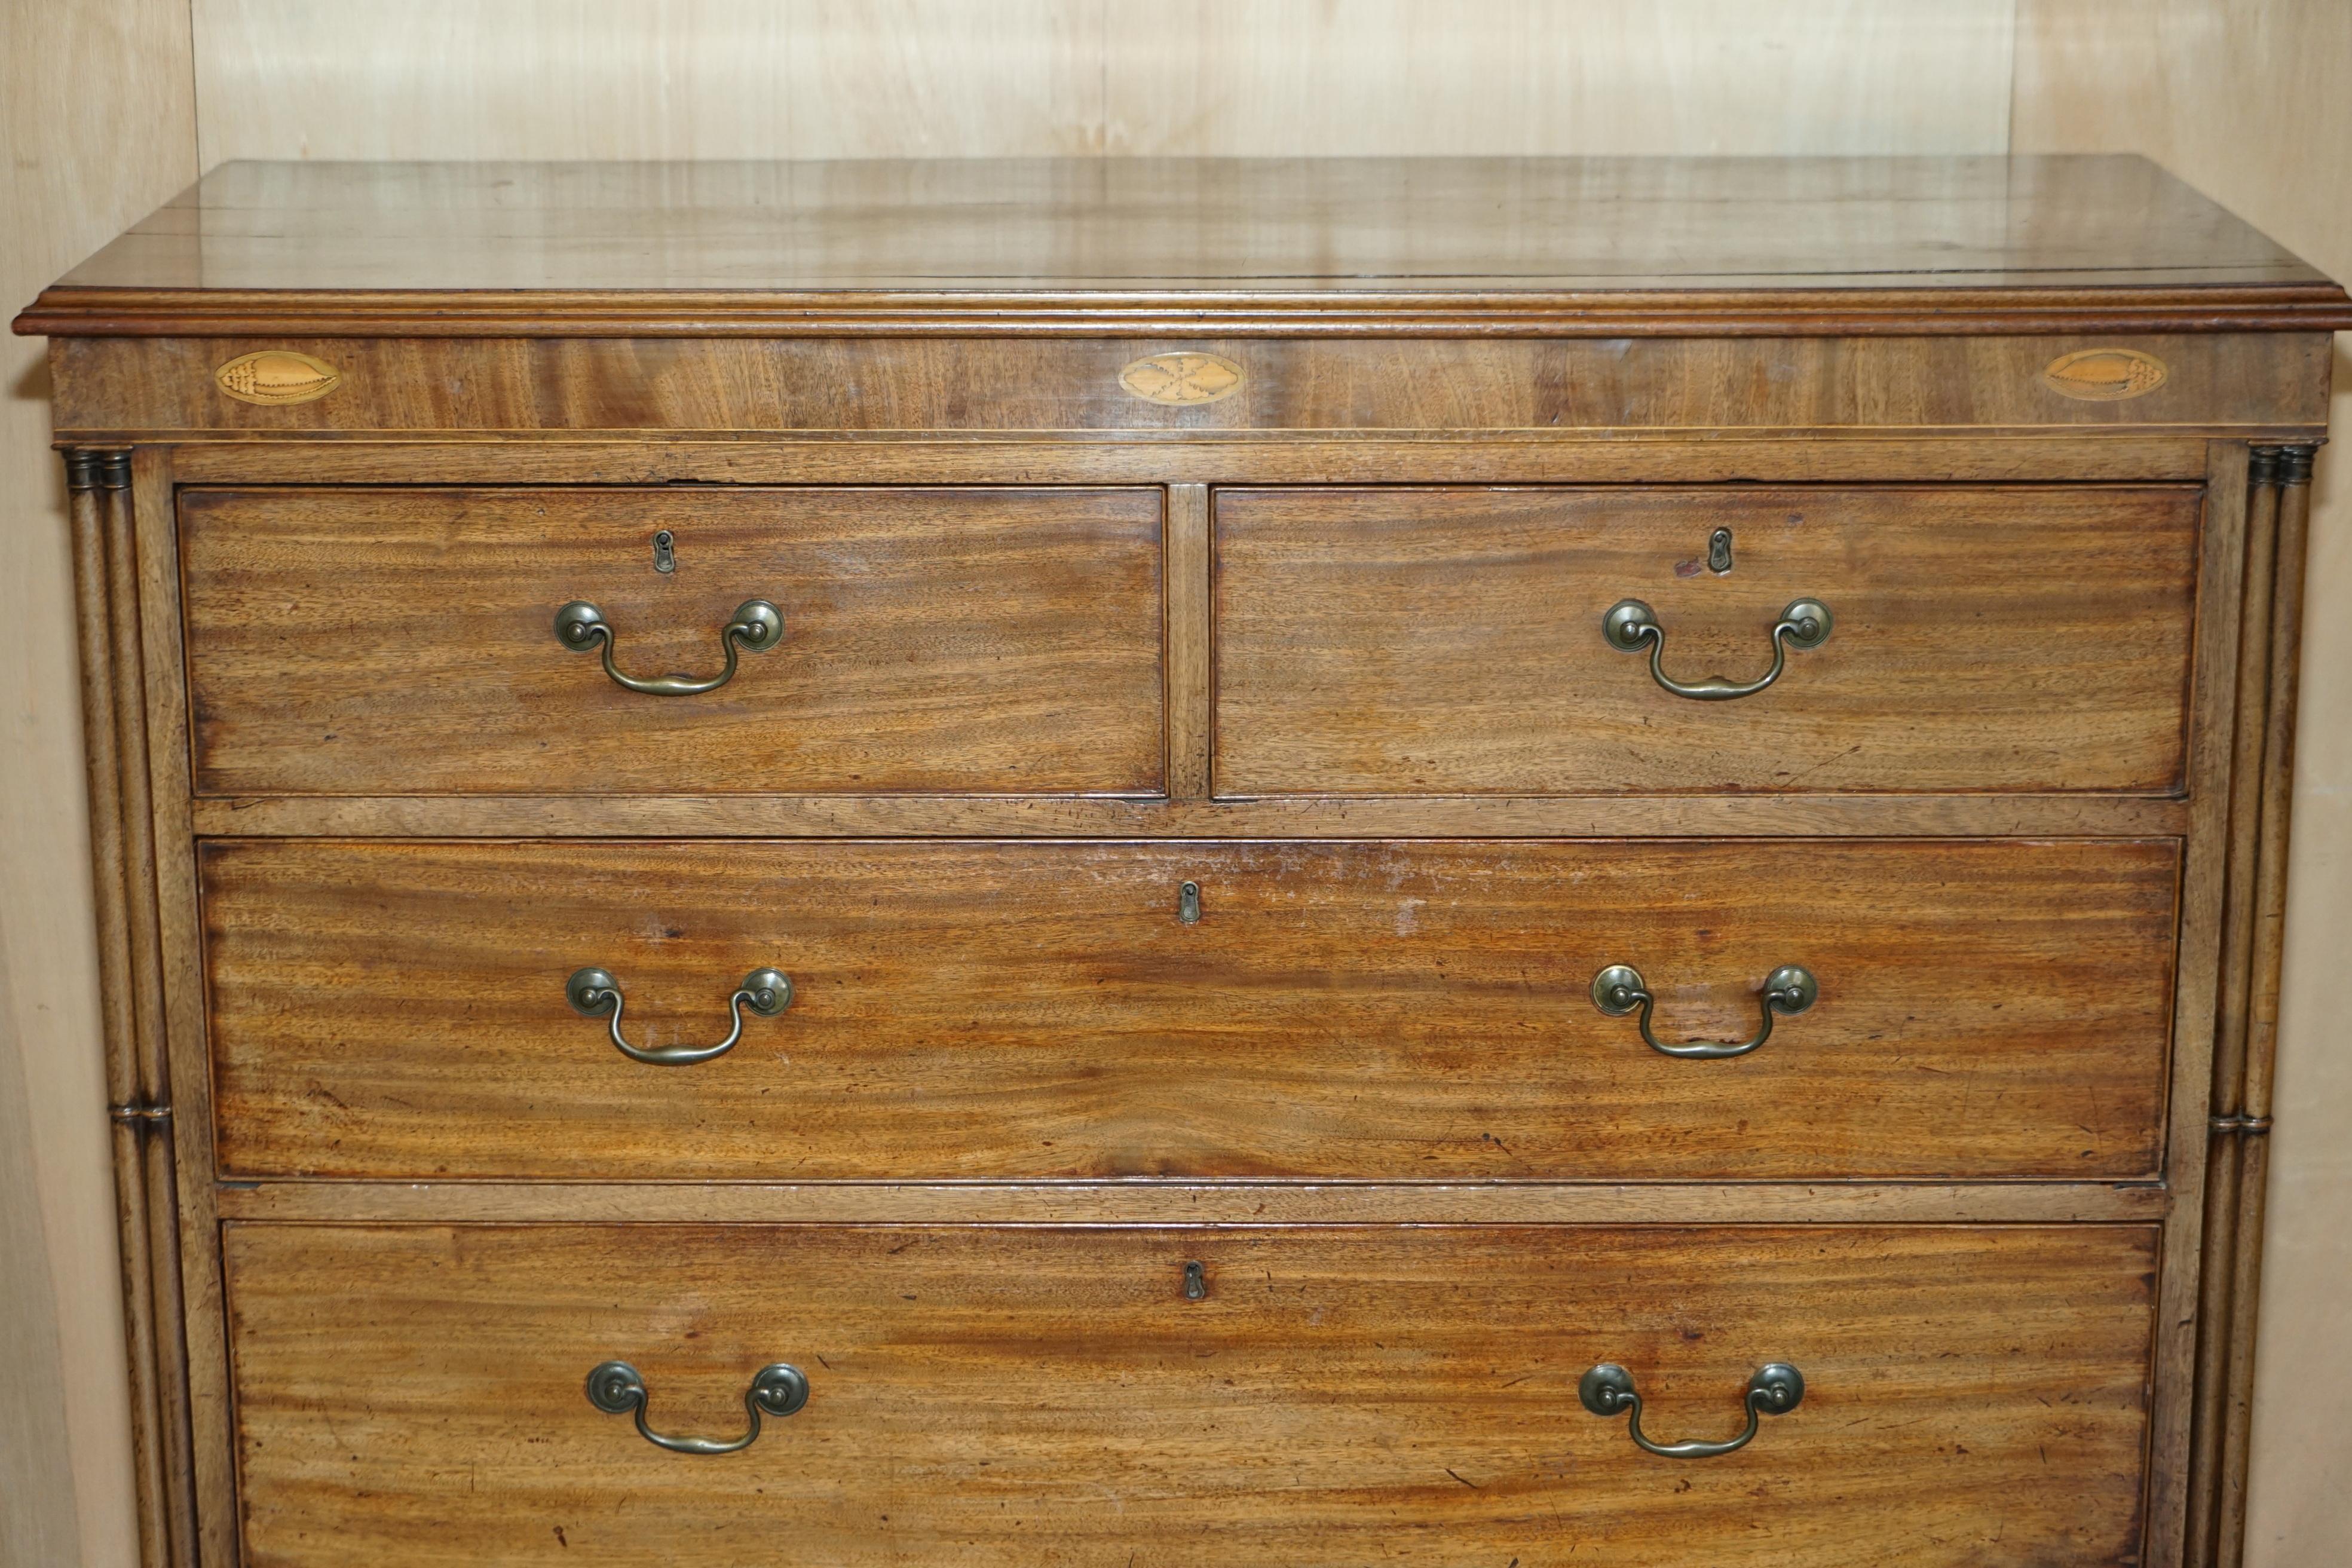 LARGE FiNE ANTIQUE THOMAS CHIPPENDALE SHERATON REVIVAL HARDWOOD CHEST OF DRAWERS For Sale 1